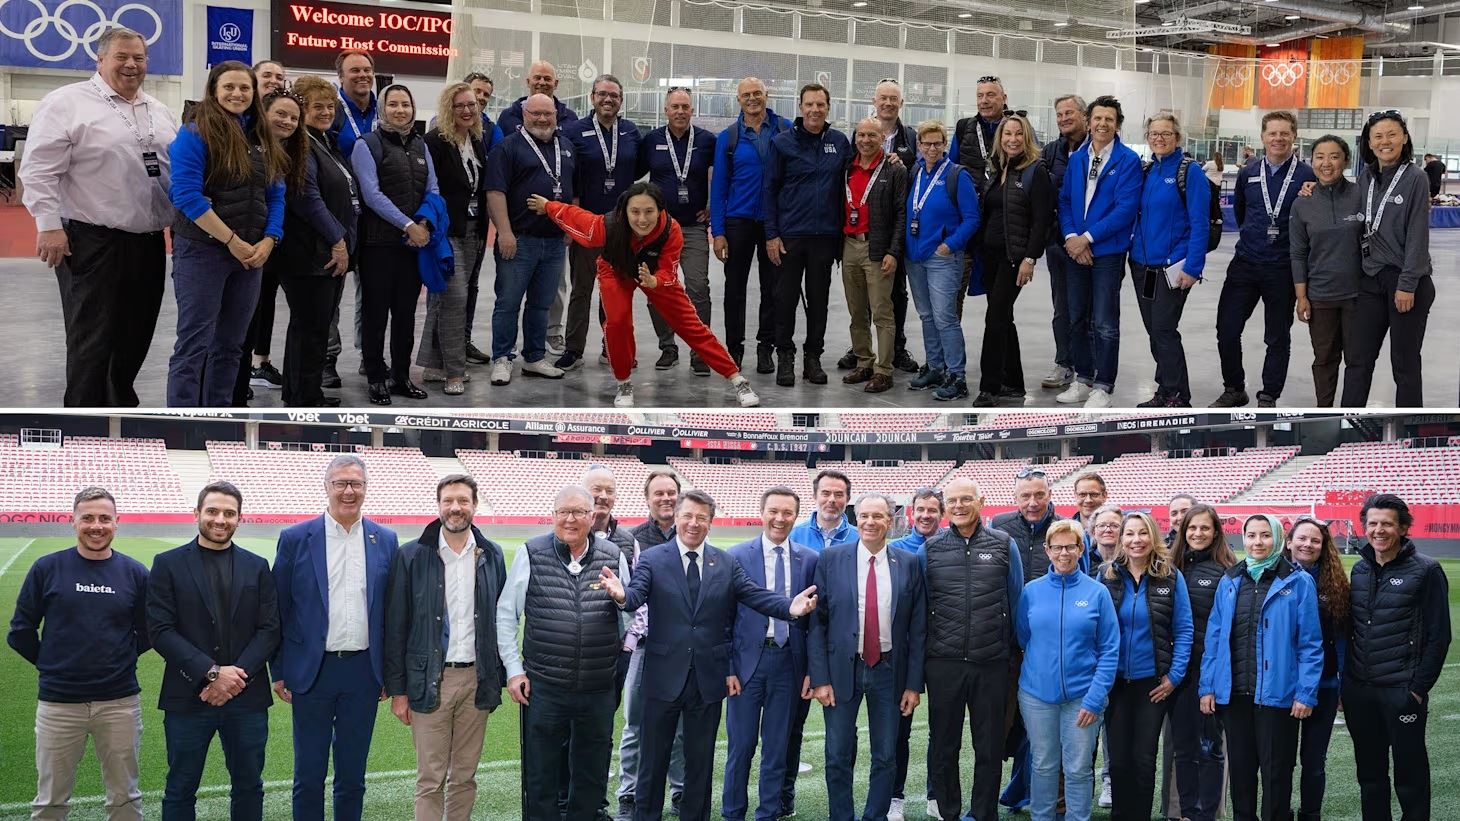 Successful visits by the Future Host Commission an important step towards host election for the Olympic Winter Games 2030 and 2034